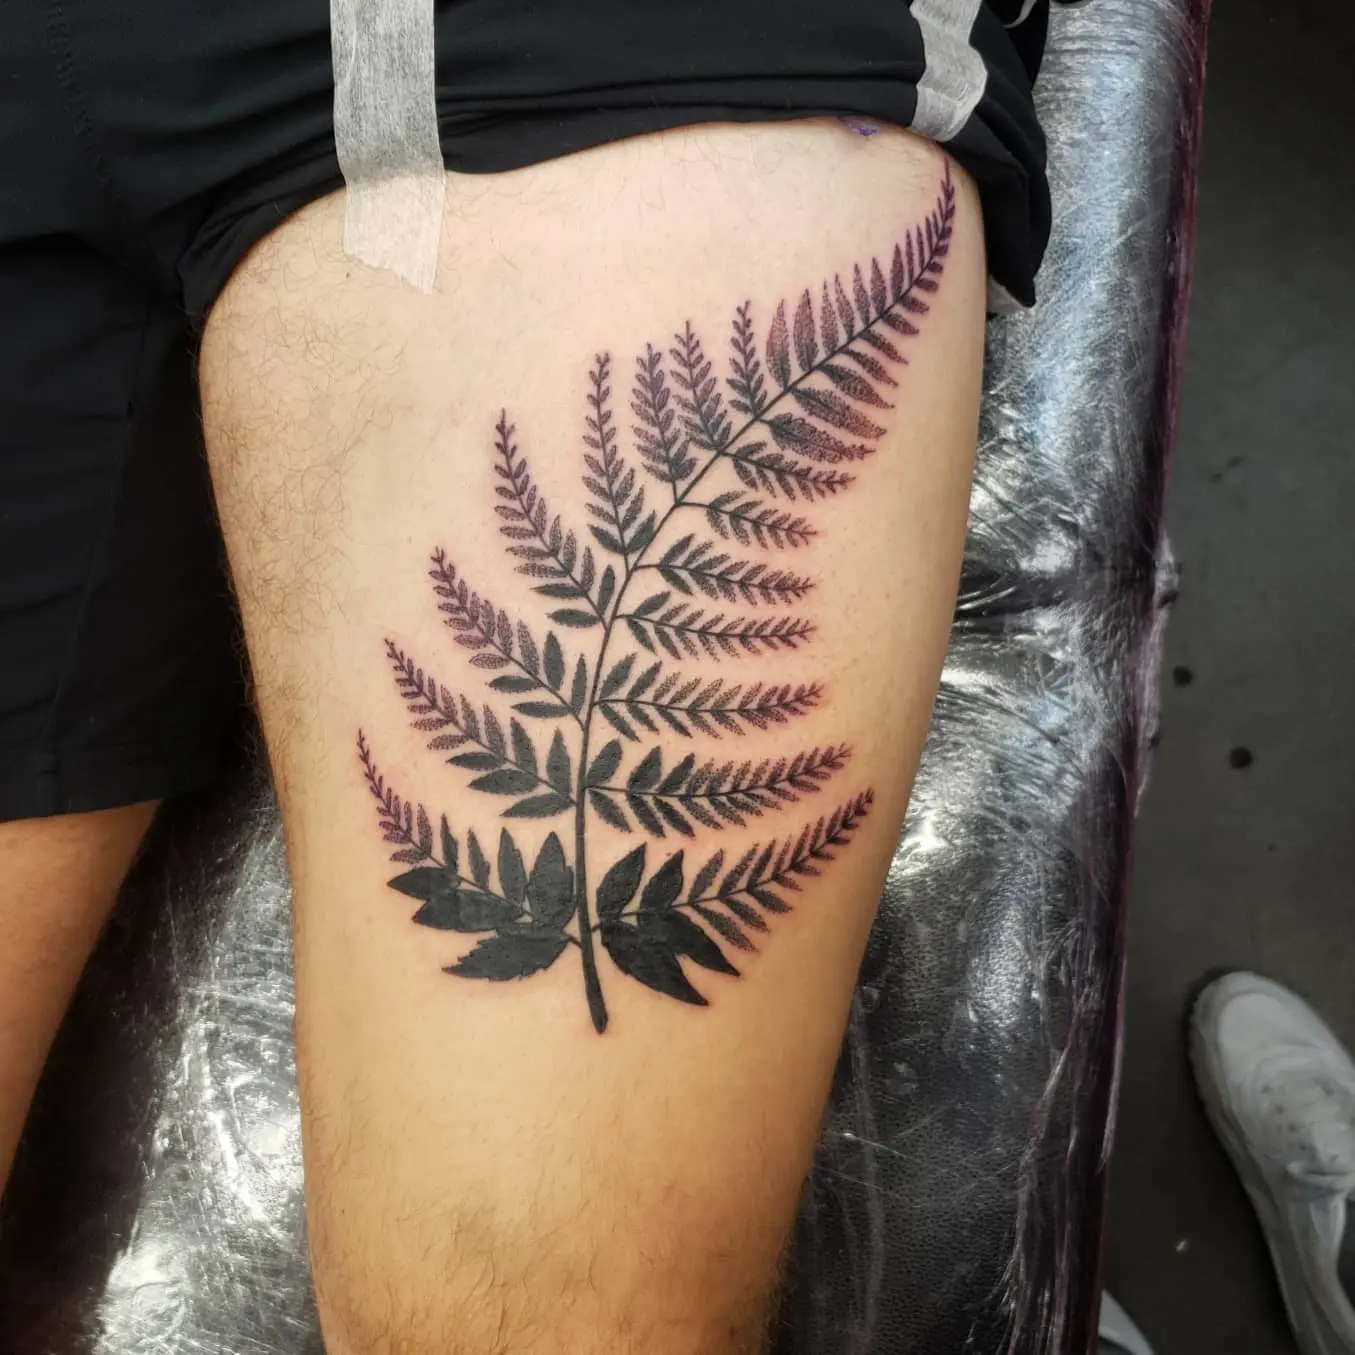 Thought you all might like my first tattoo : r/WitchesVsPatriarchy